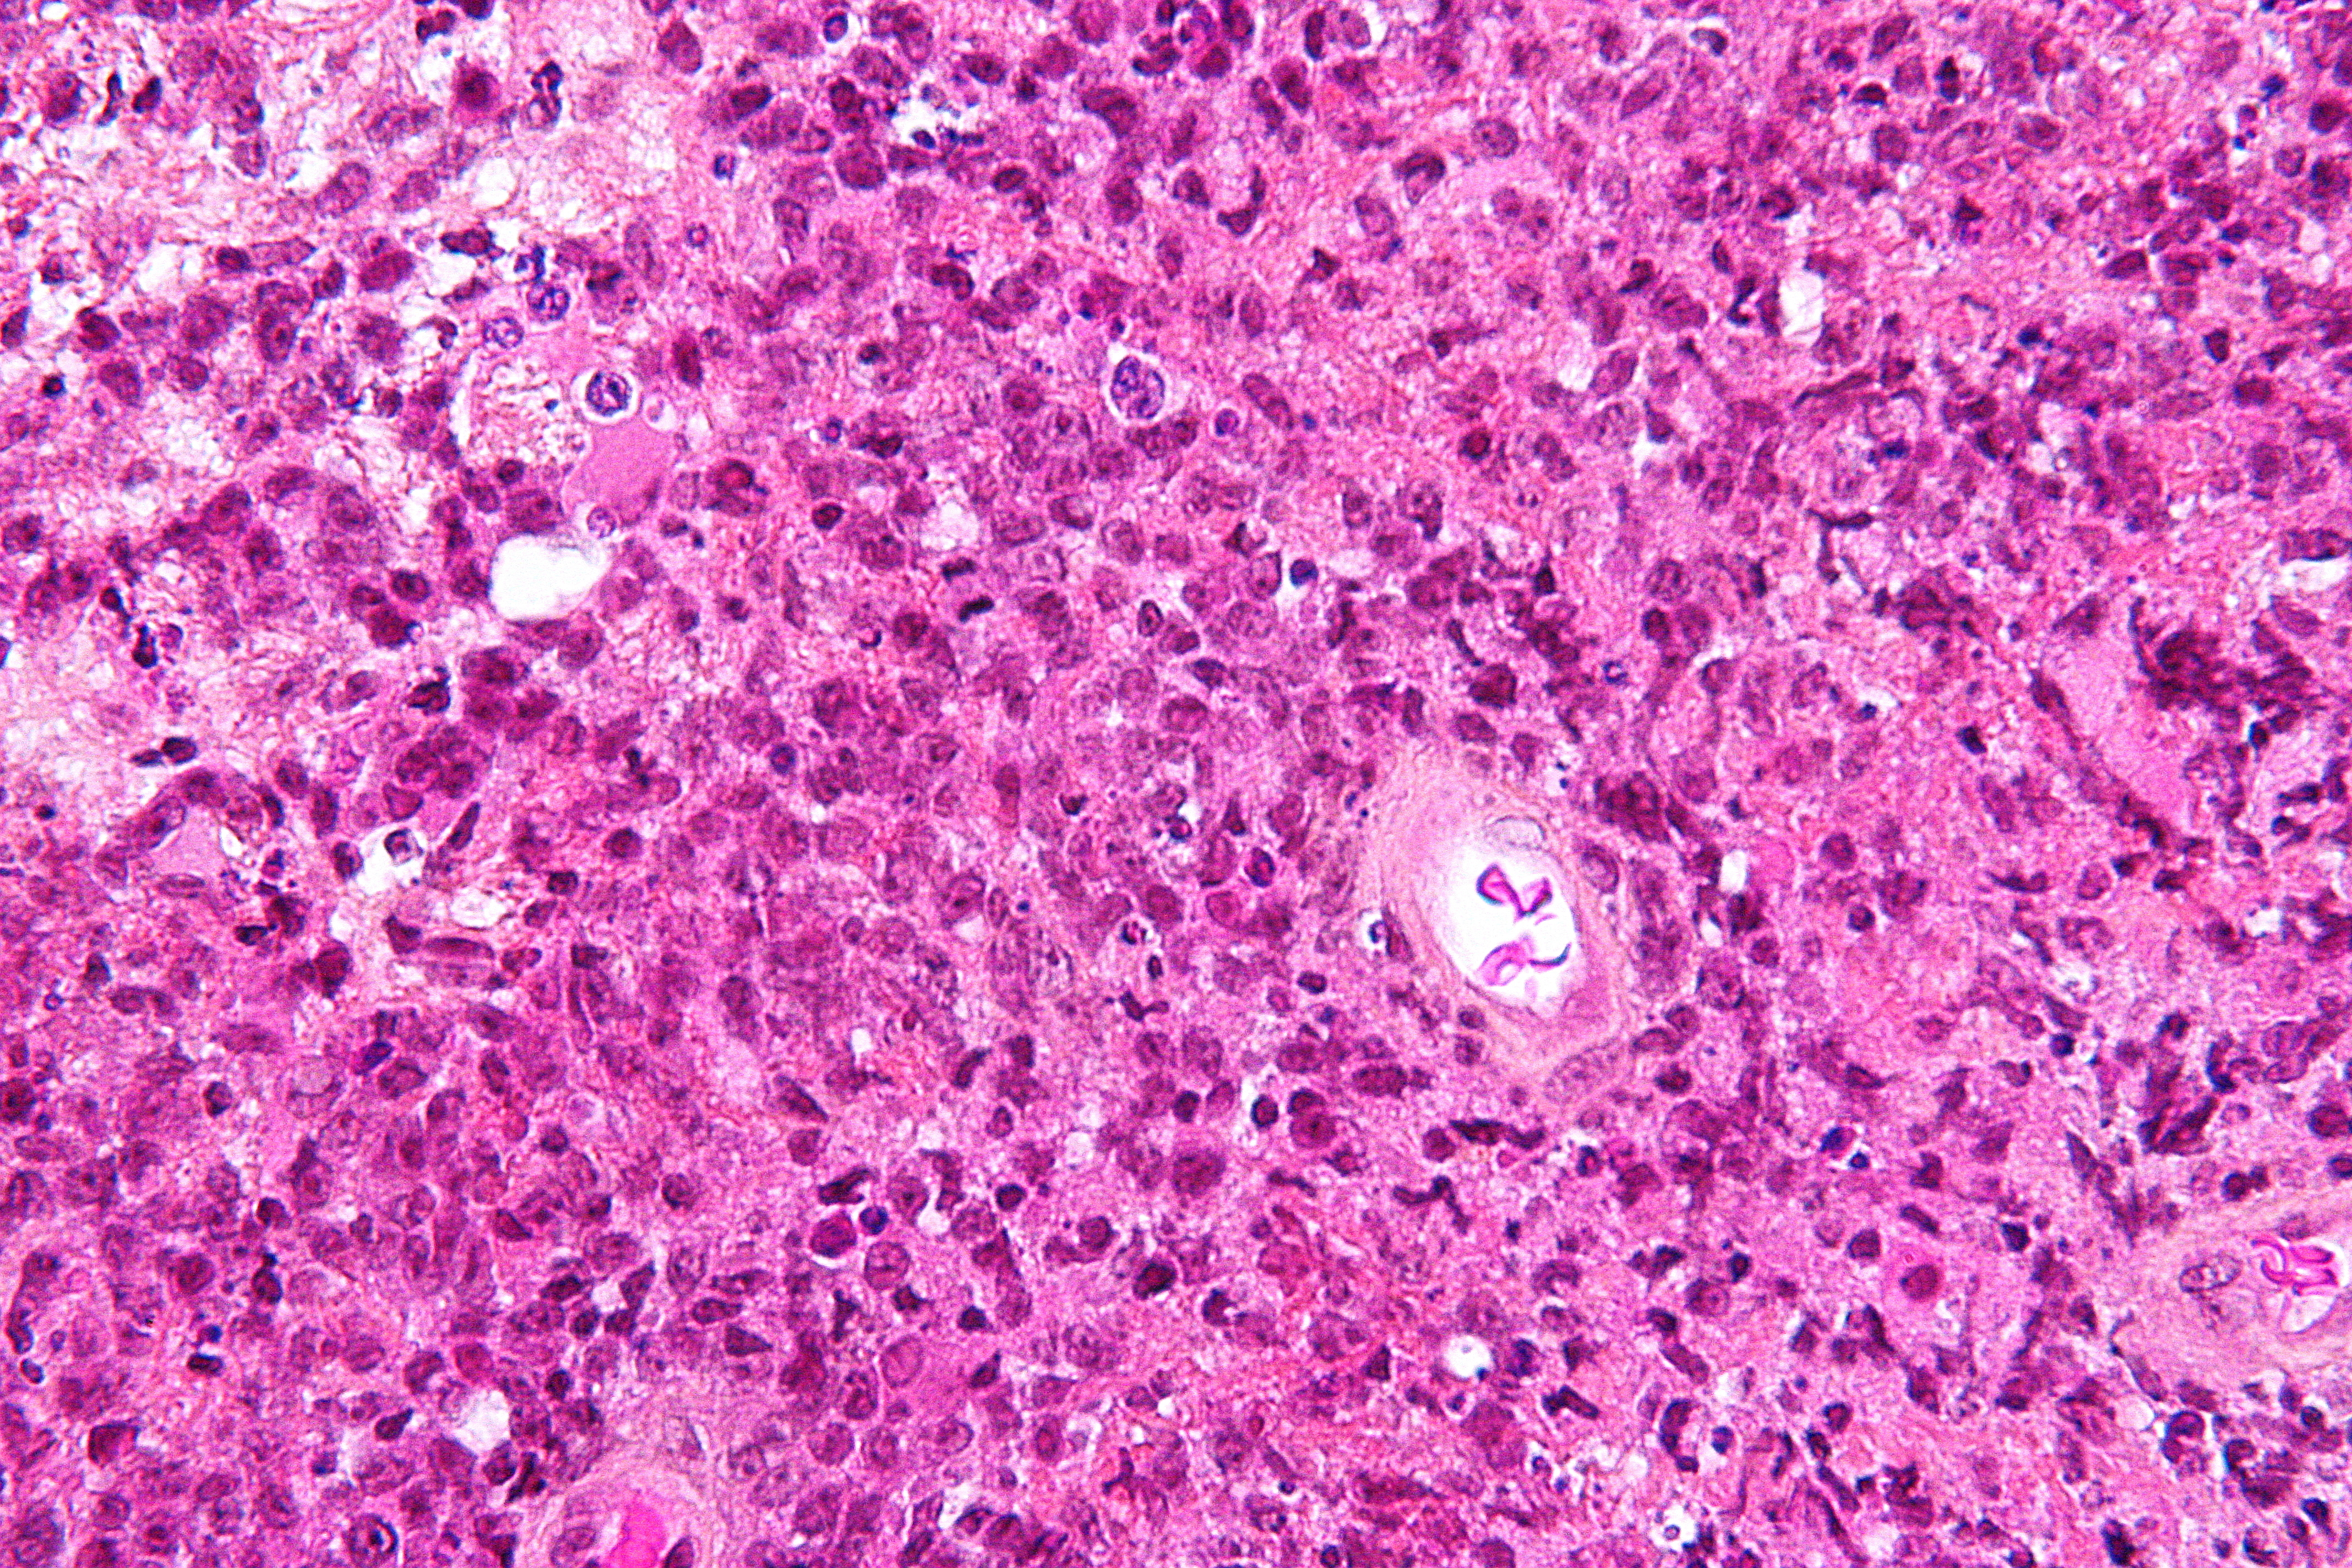 Biopsy of primary CNS lymphoma (source) 